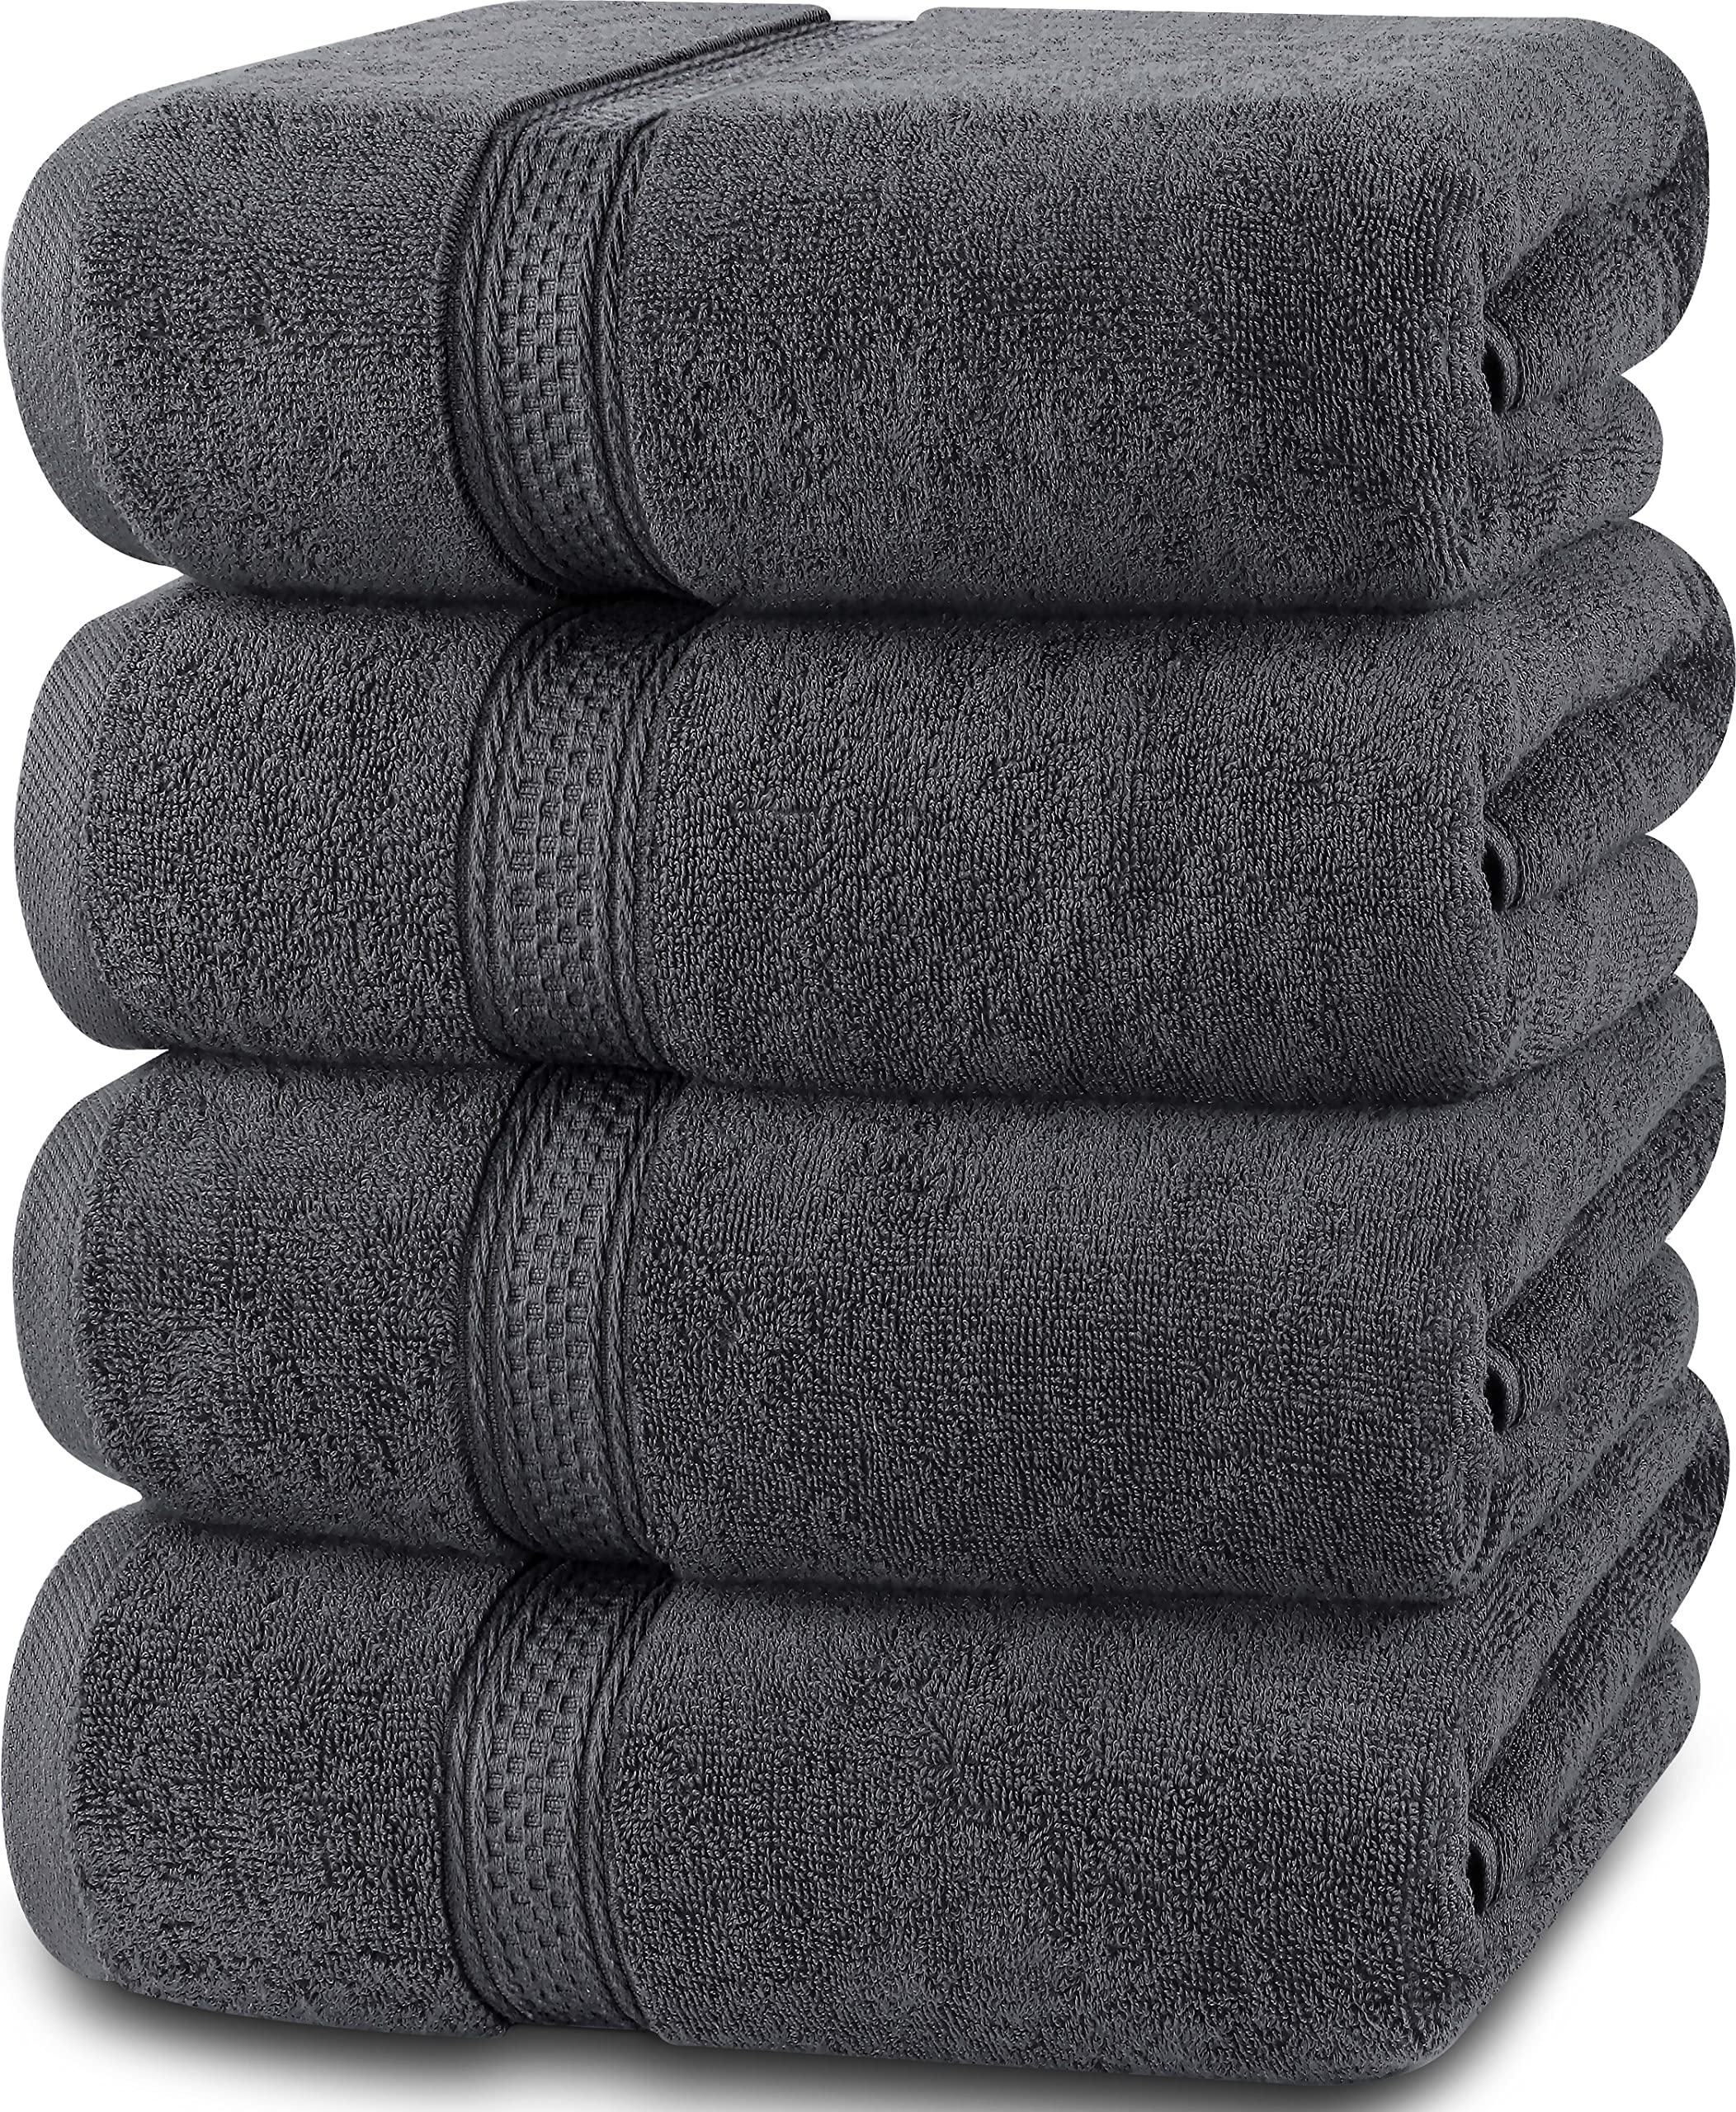  Utopia Towels - Luxurious Jumbo Bath Sheet 2 Piece - 600 GSM  100% Ring Spun Cotton Highly Absorbent and Quick Dry Extra Large Bath Towel  - Super Soft Hotel Quality Towel (